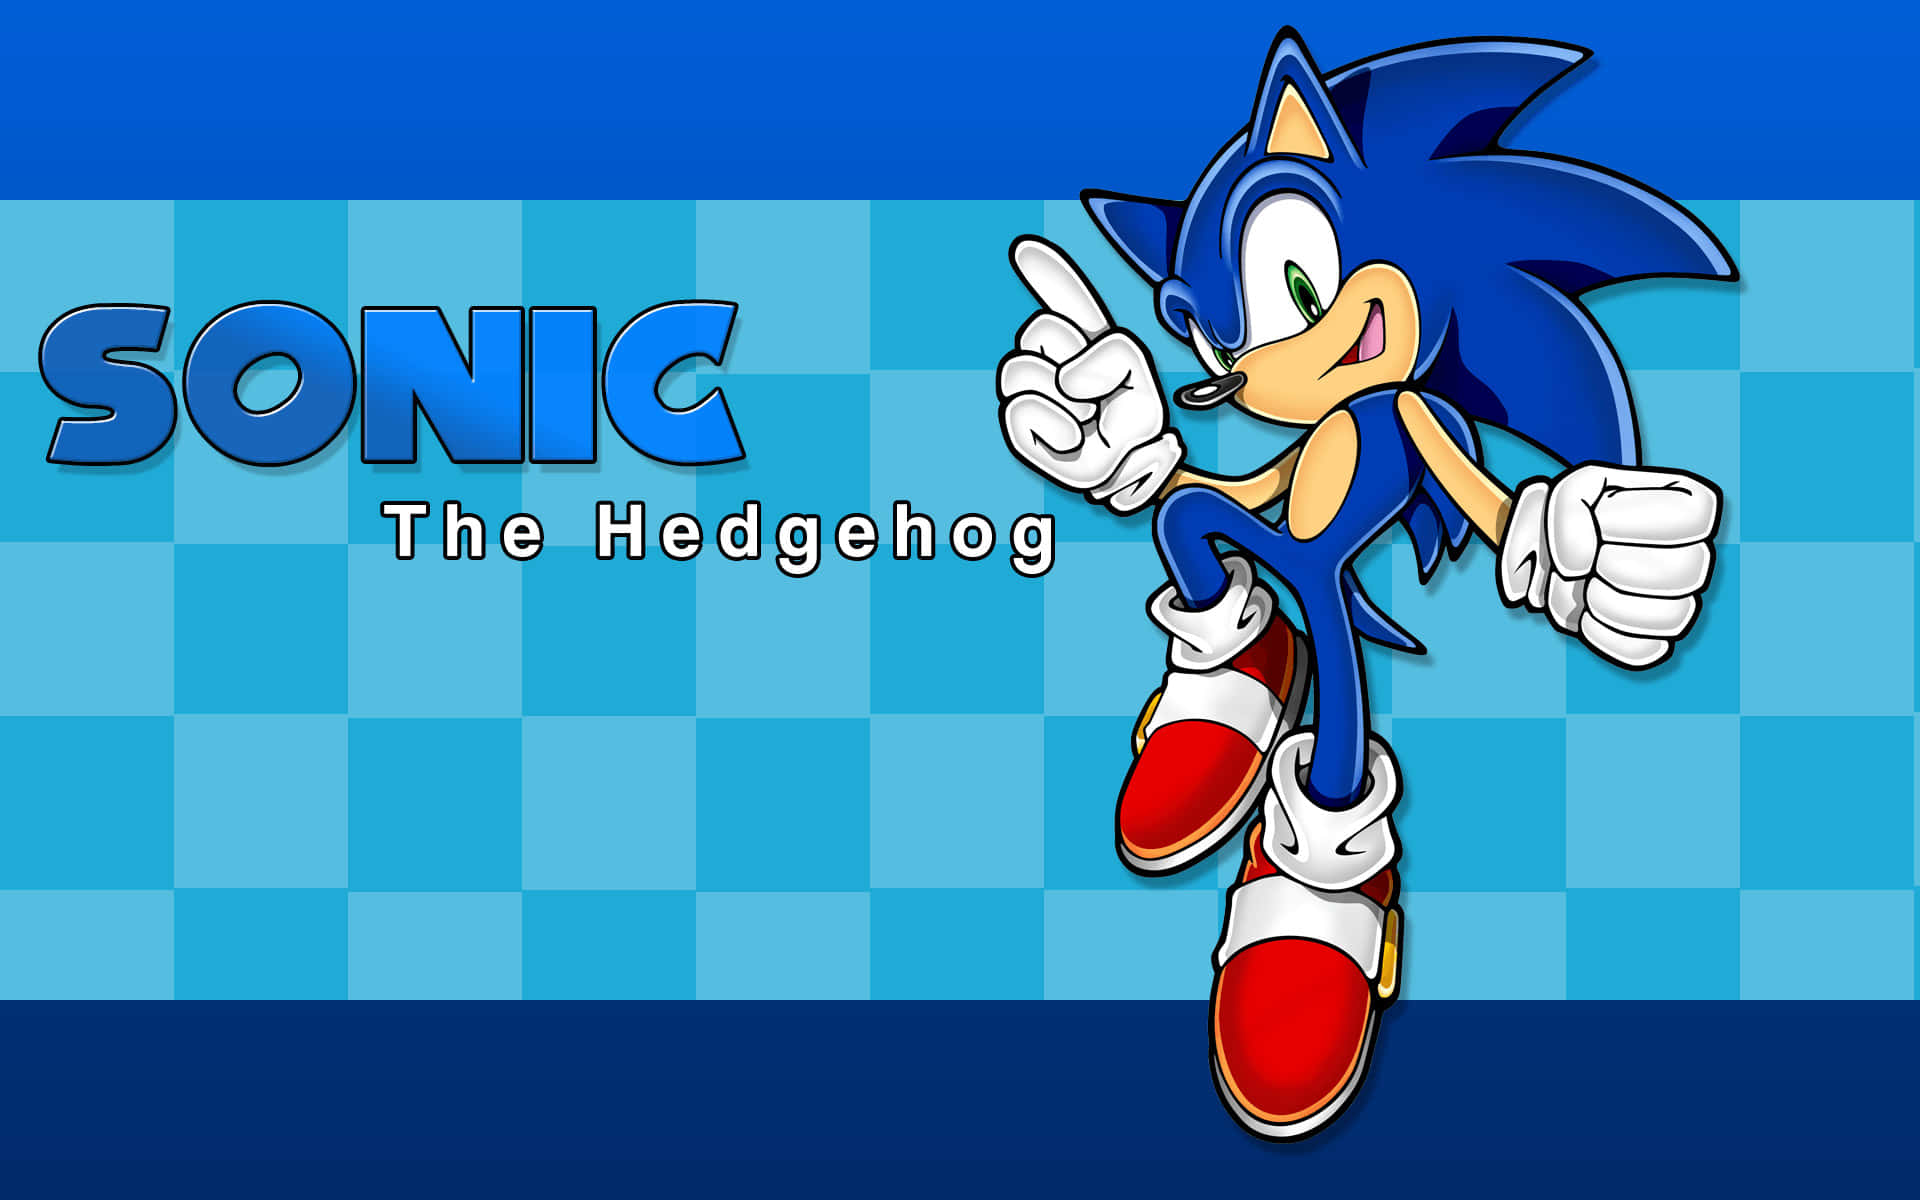 Sonic The Hedgehog - Faster Than the Speed of Sound